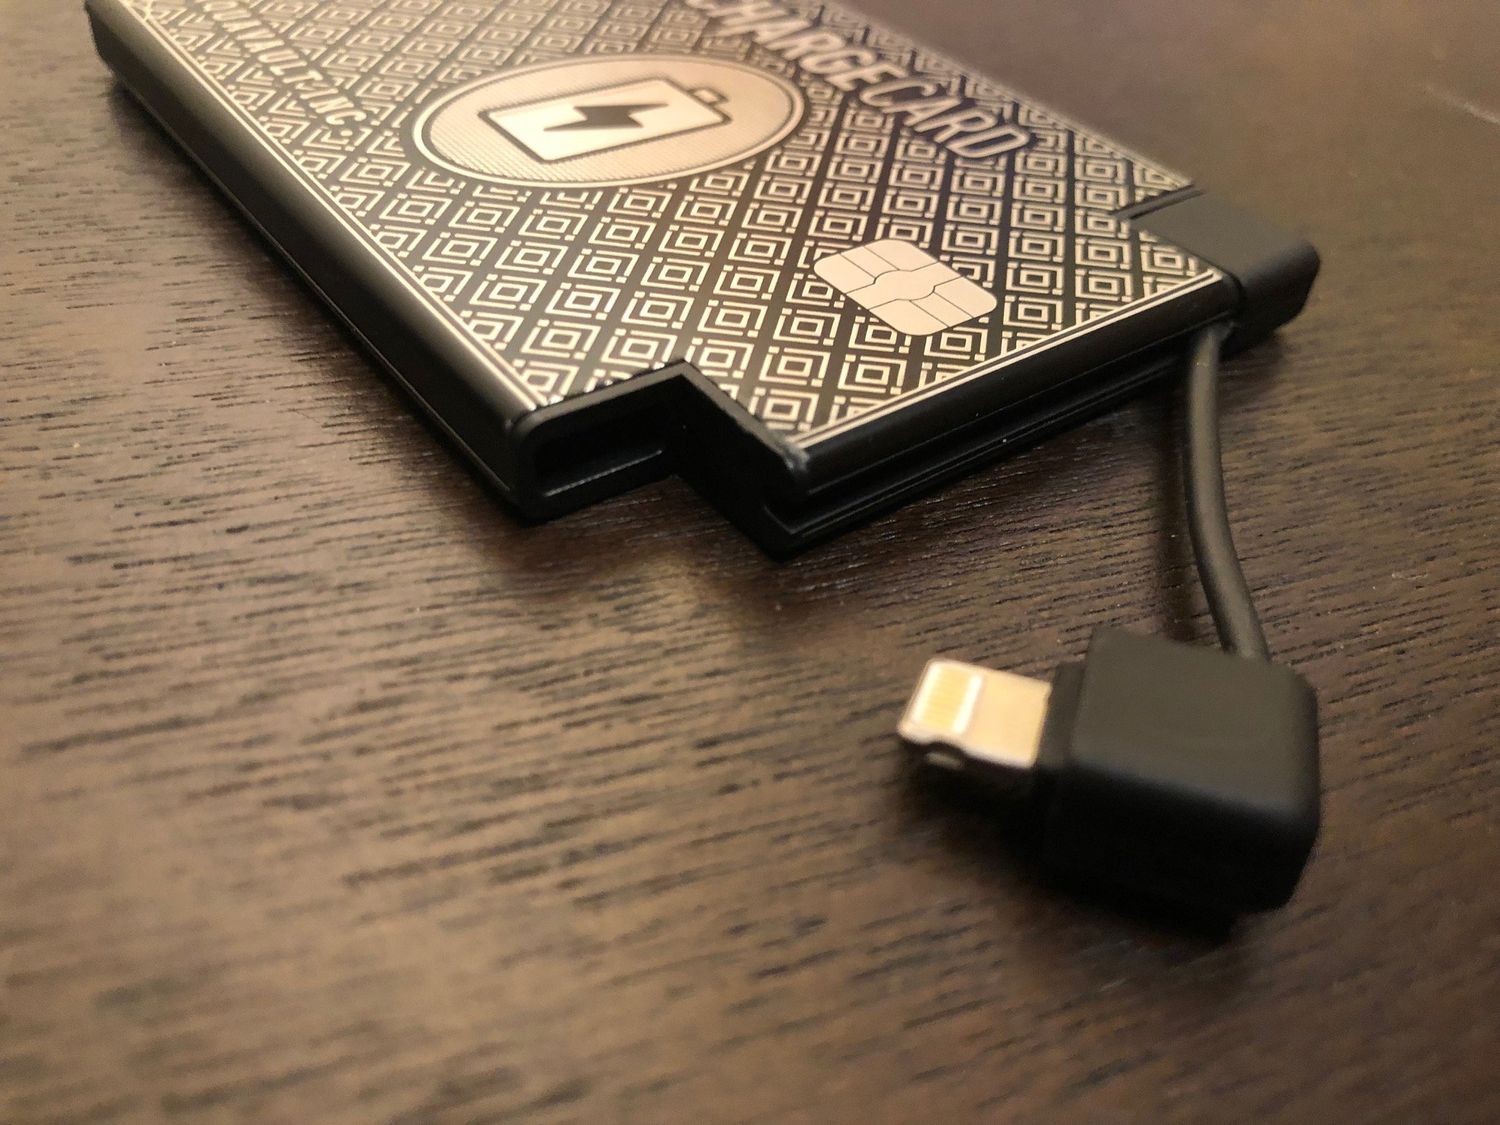 chargecard-is-a-slim-iphone-usb-charger-that-fits-in-a-wallet